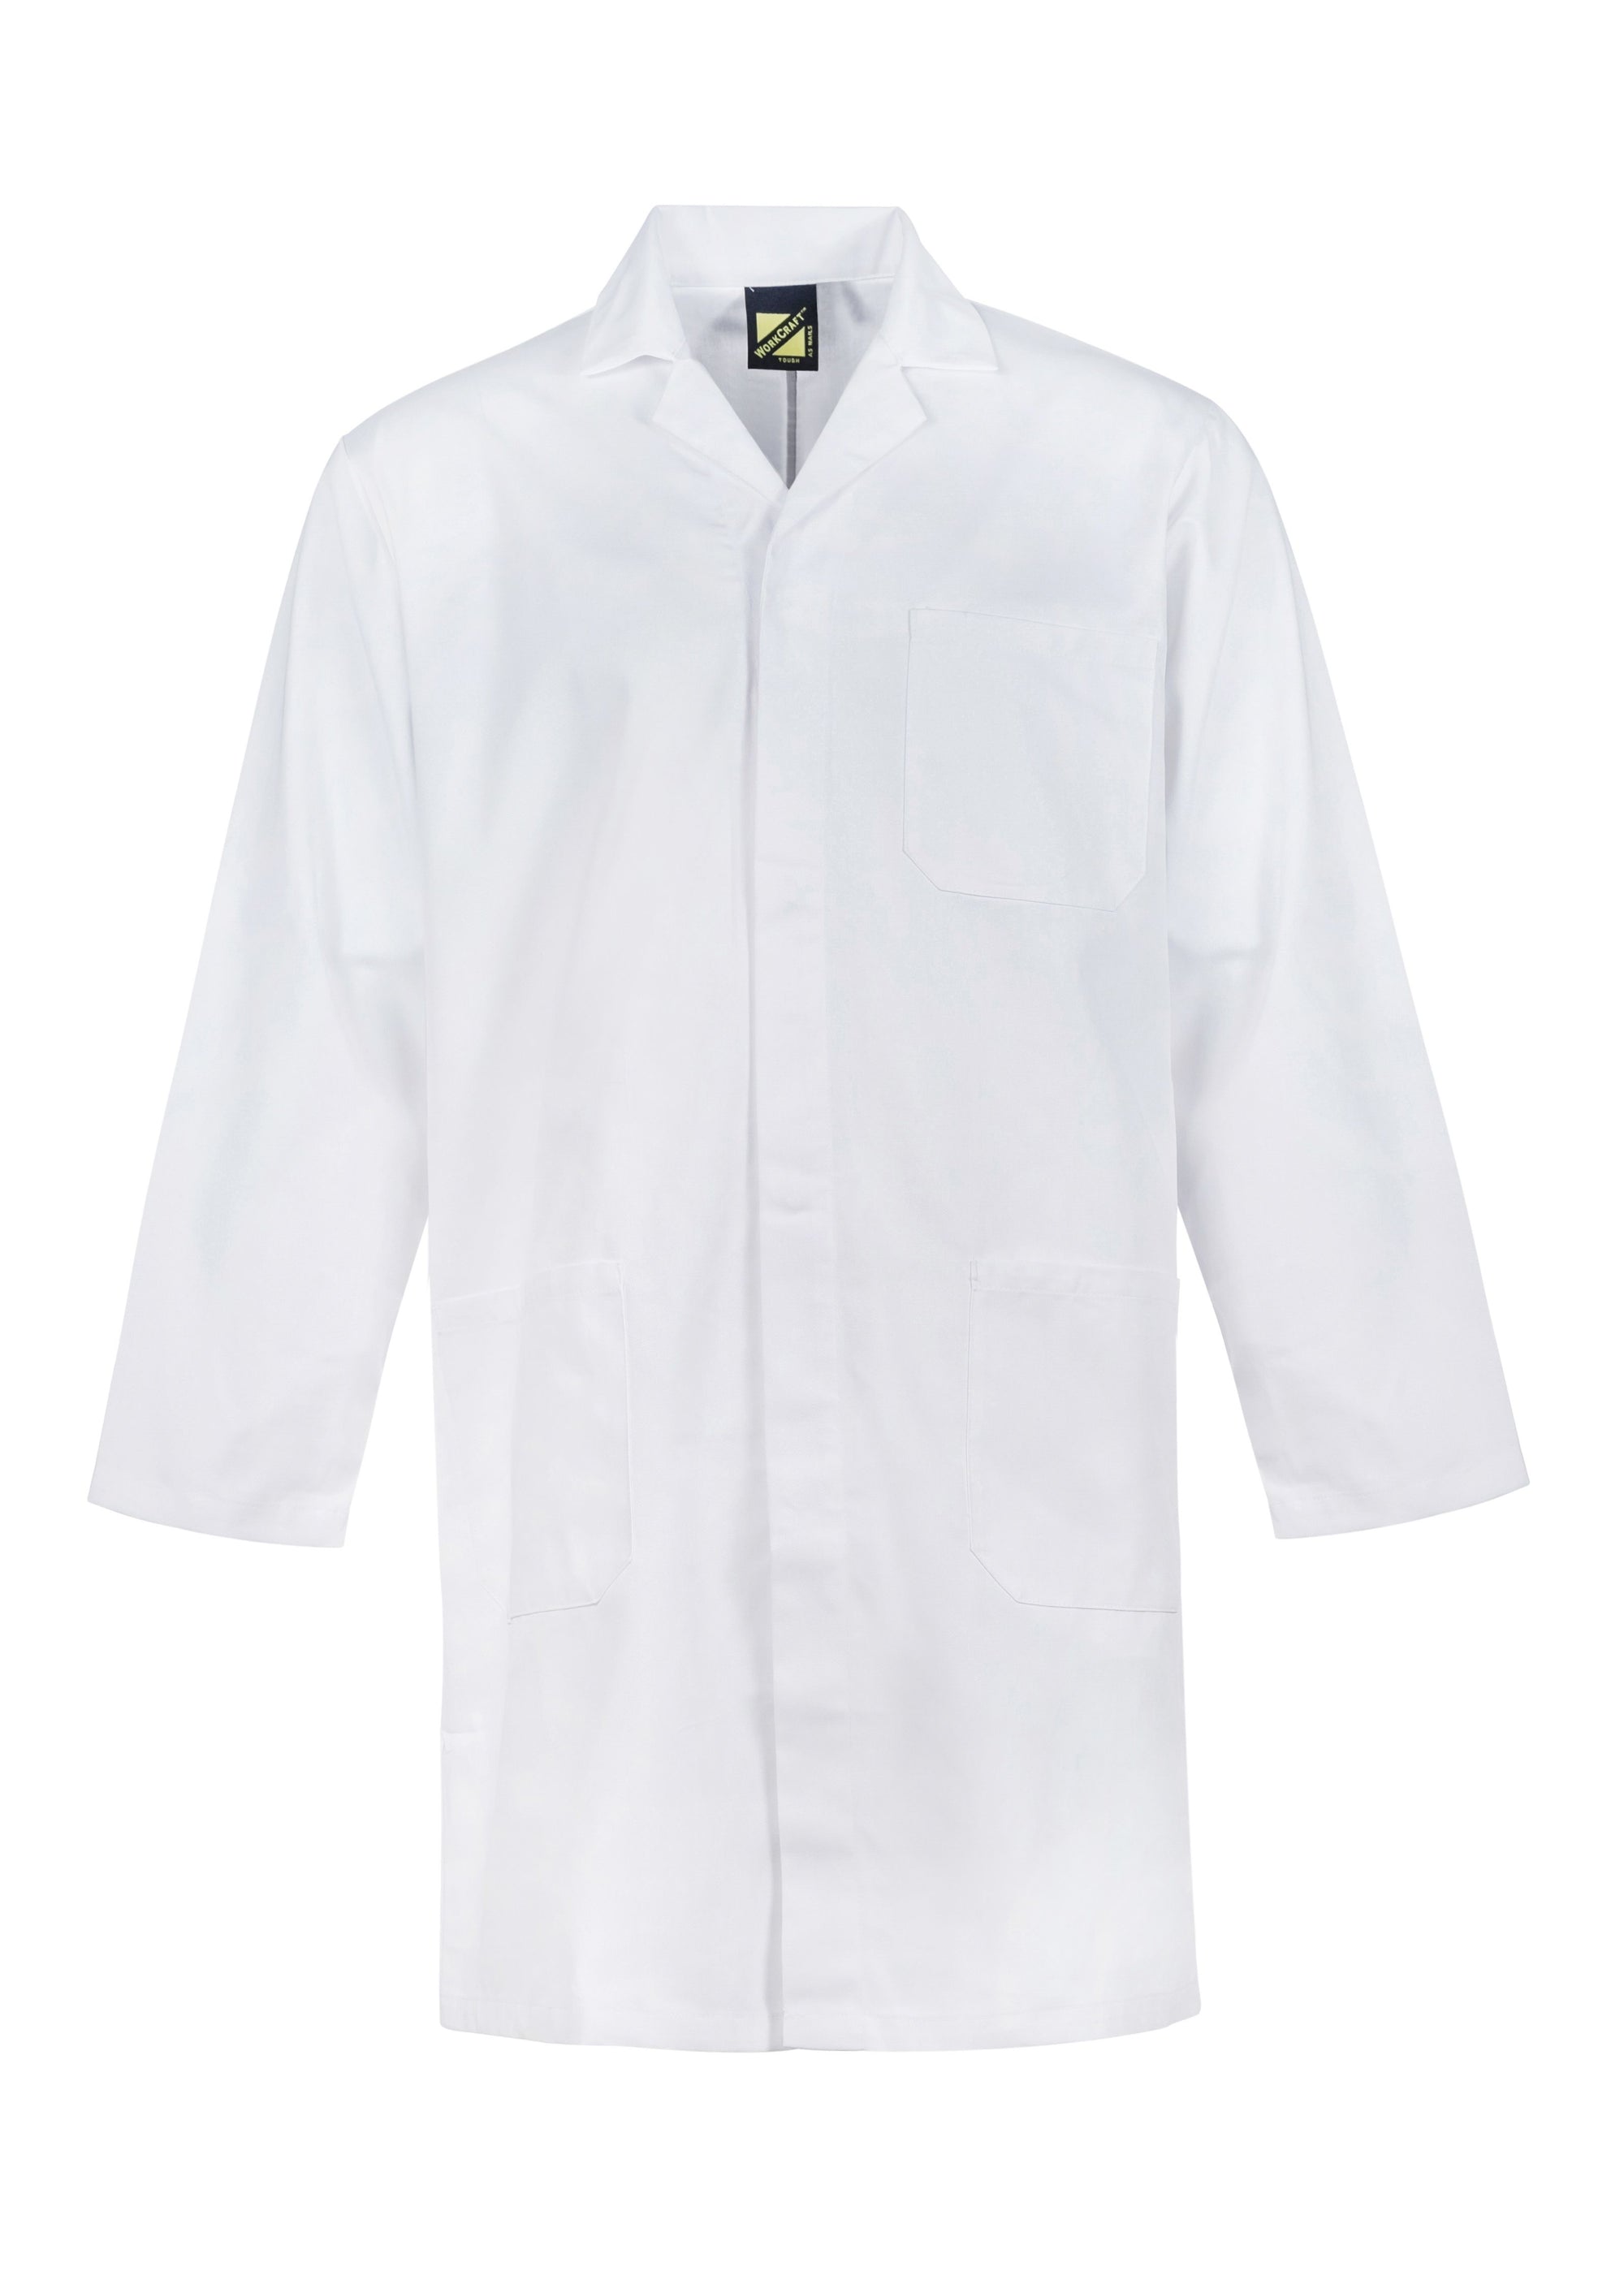 WorkCraft Mens White Dustcoat with Pockets ls 220g 2xl